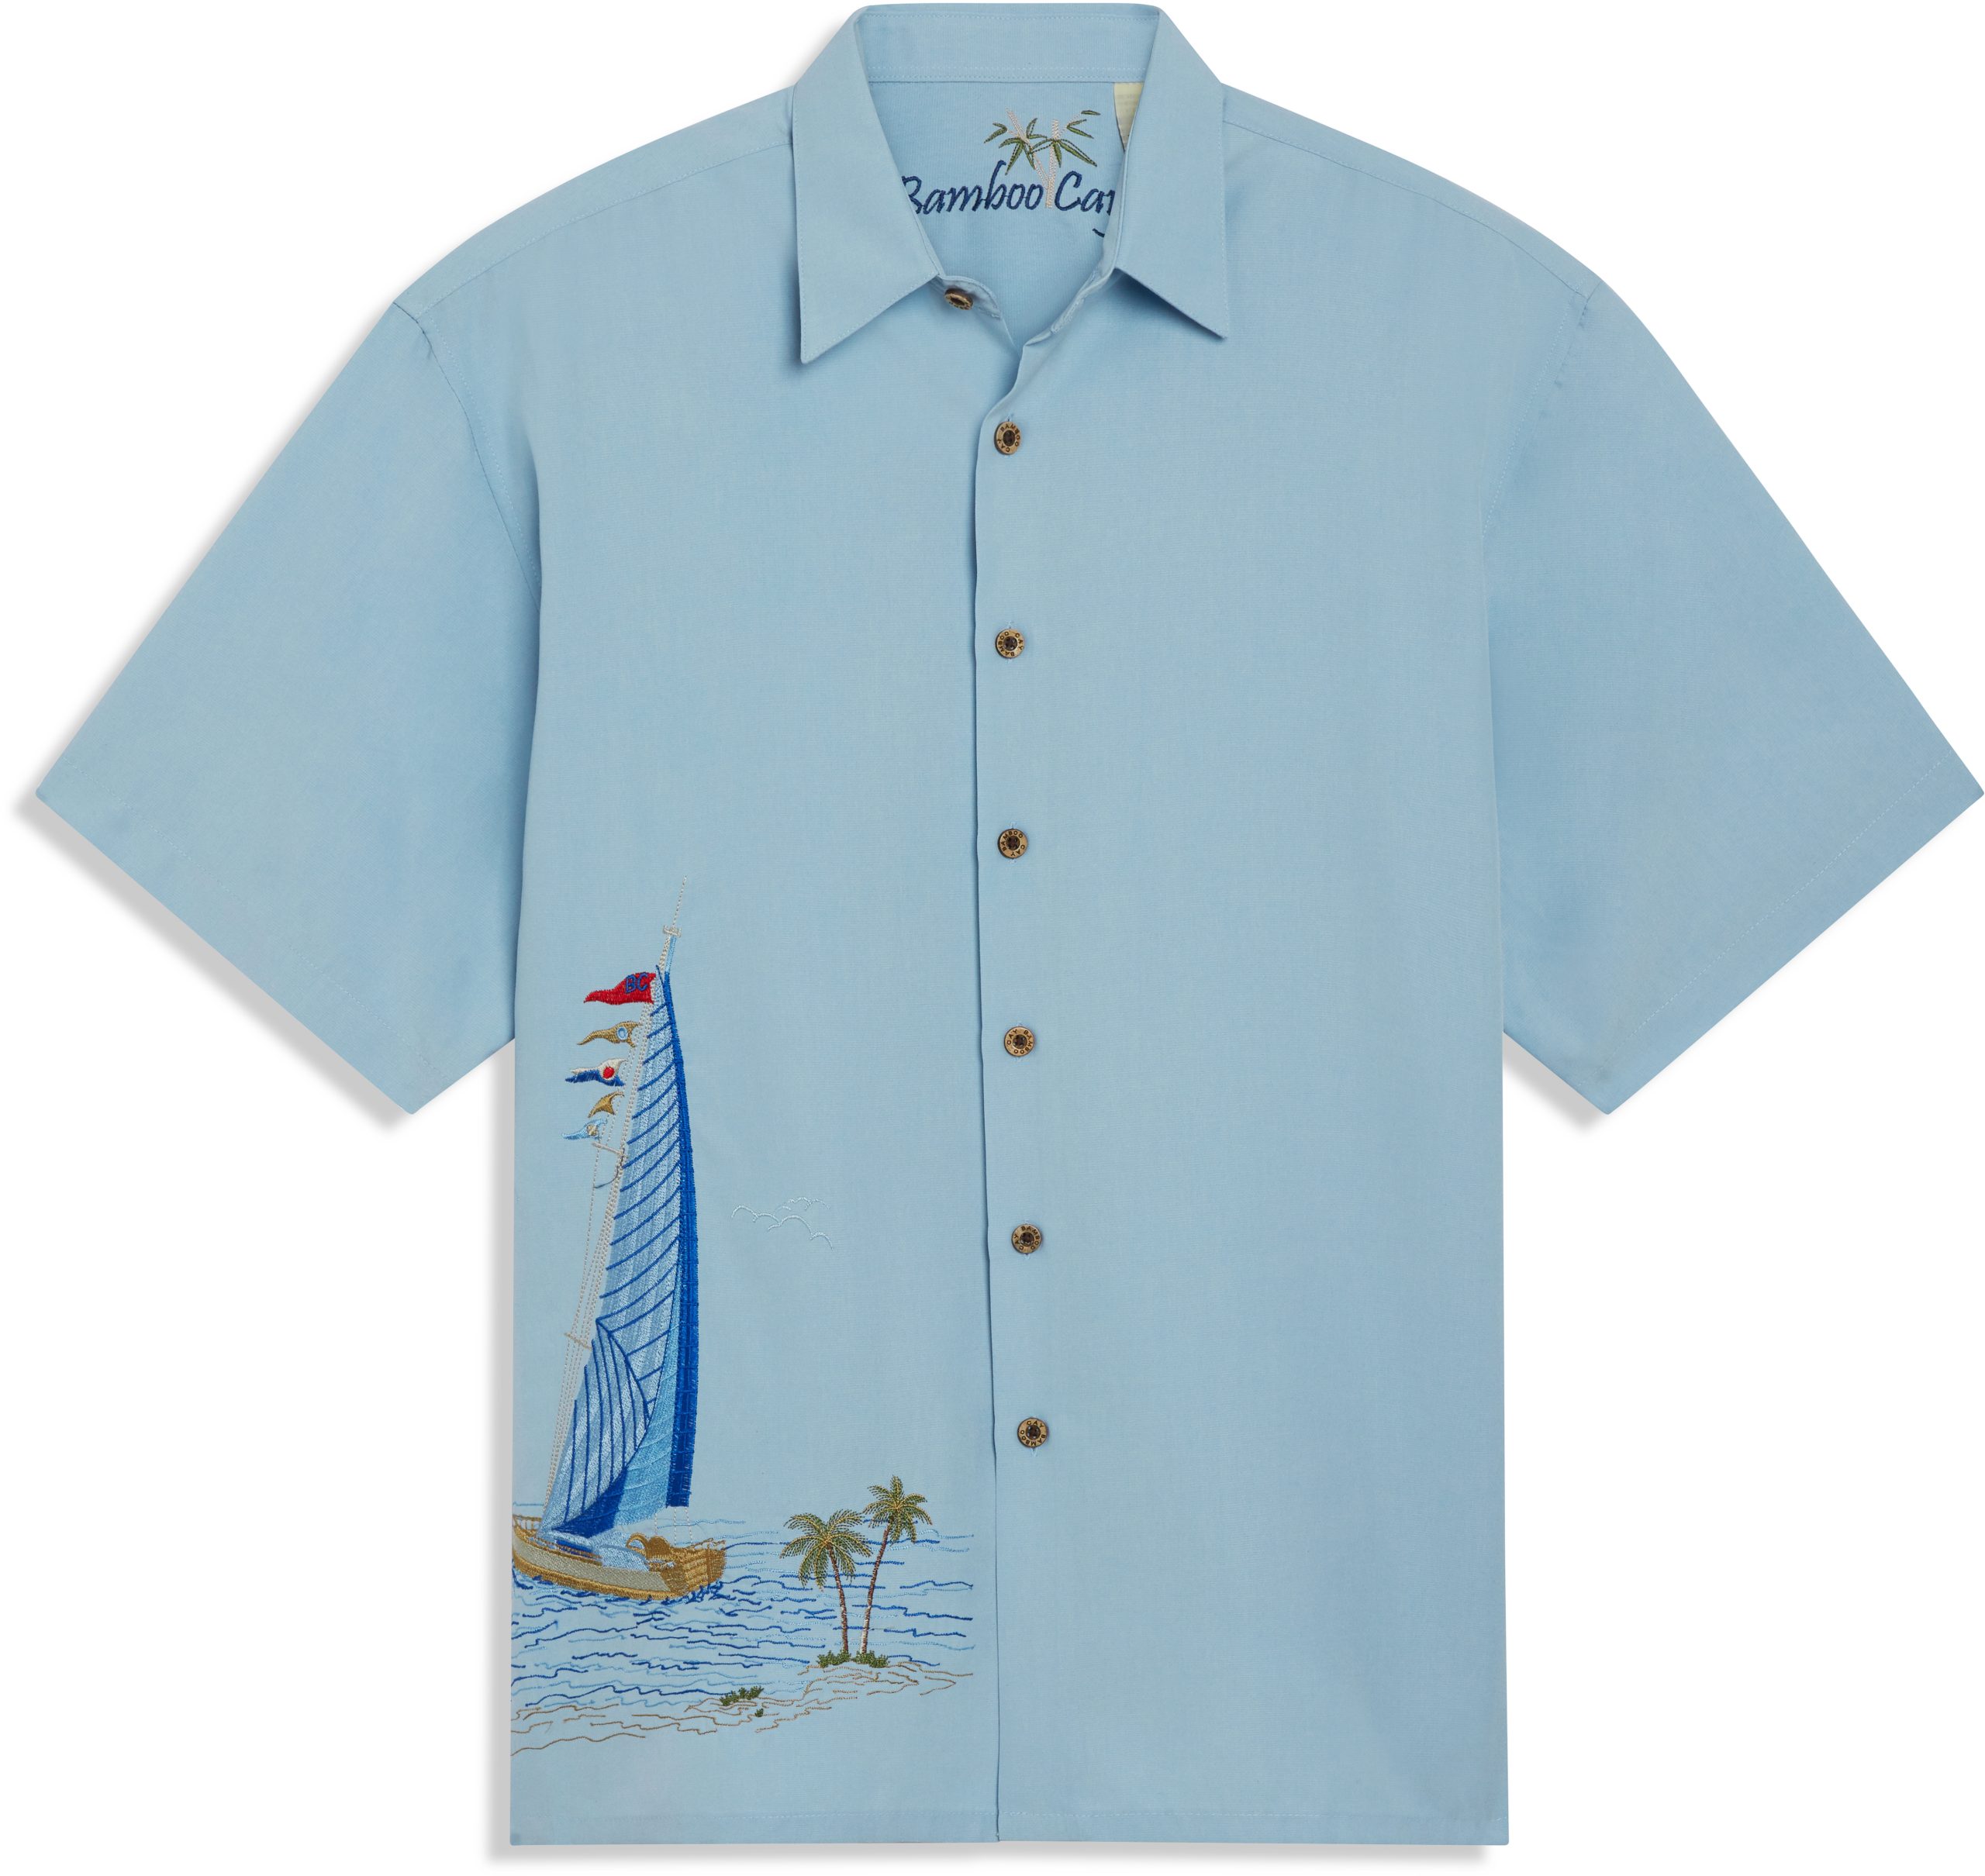 Bamboo Cay® Official Site — Sailing the Good Life Camp Shirt